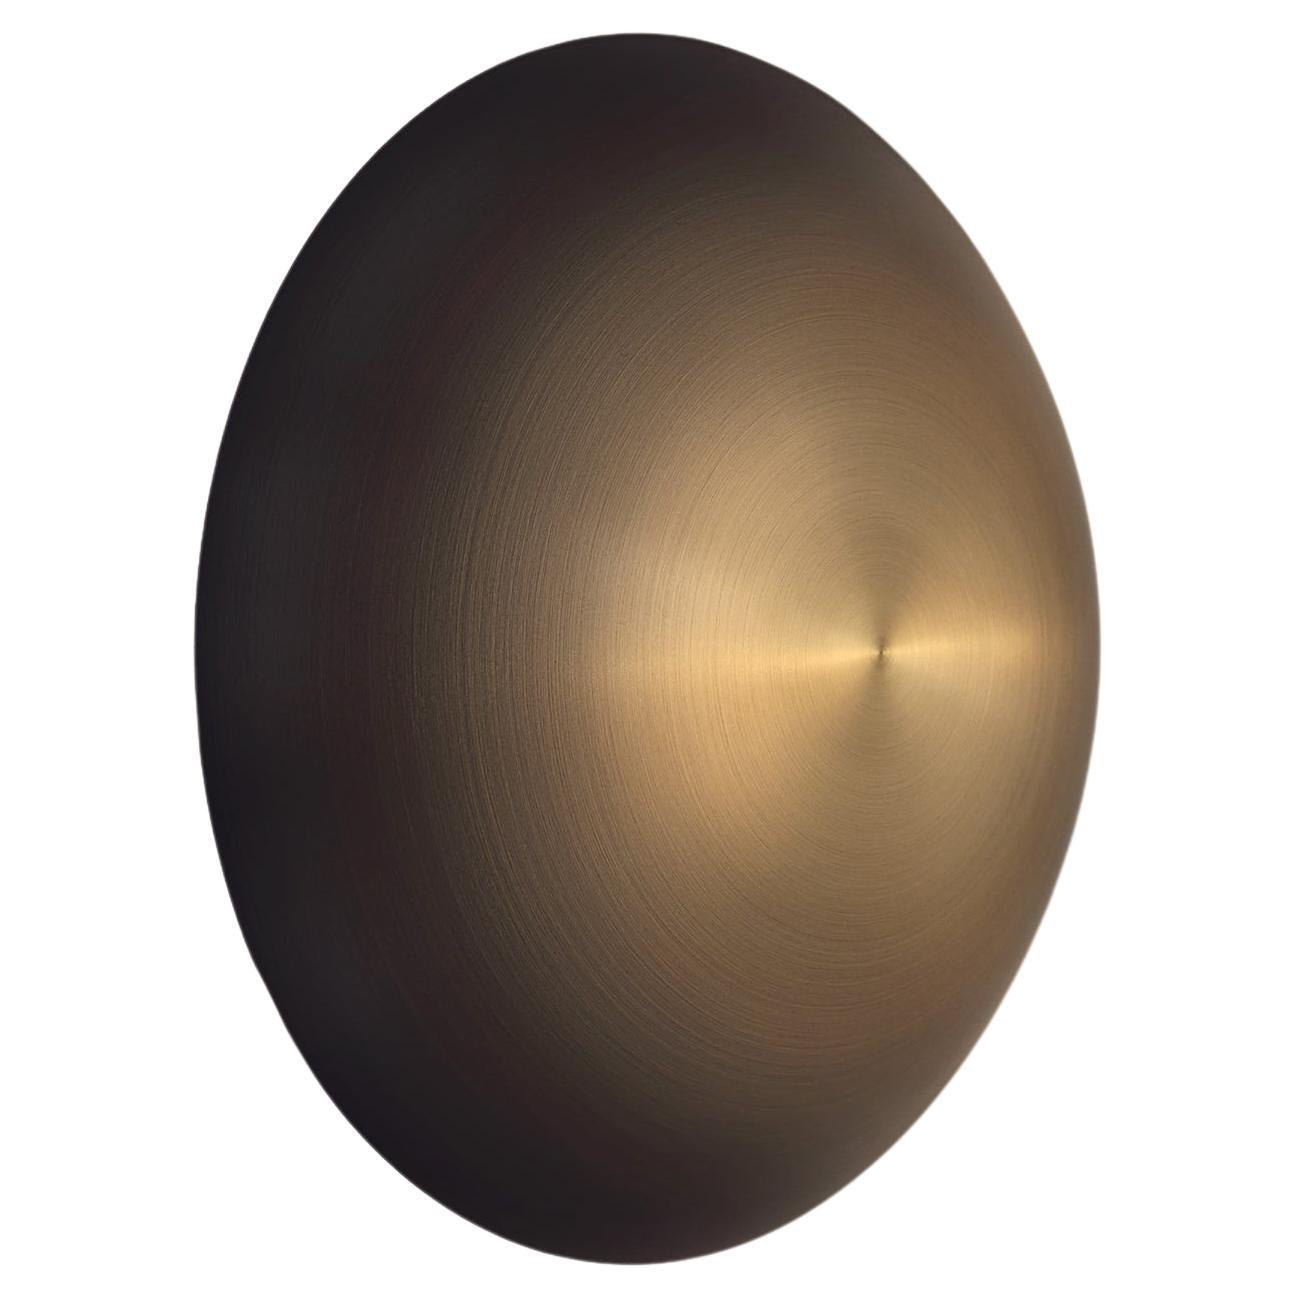 Cosmic 'Comet Ore 26' Bronze Gradient Patinated Brass Wall Light, Sconce